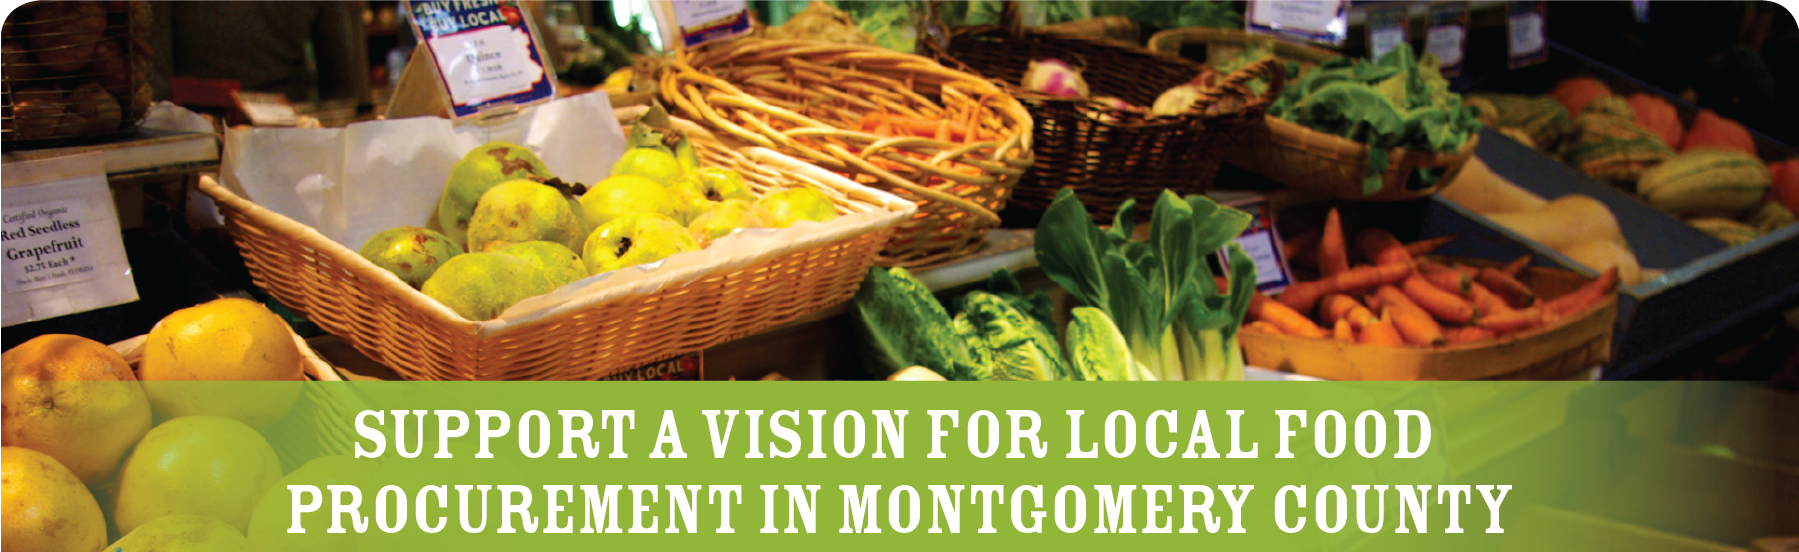 Support a Vision for Local Food Procurement in Montgomery County